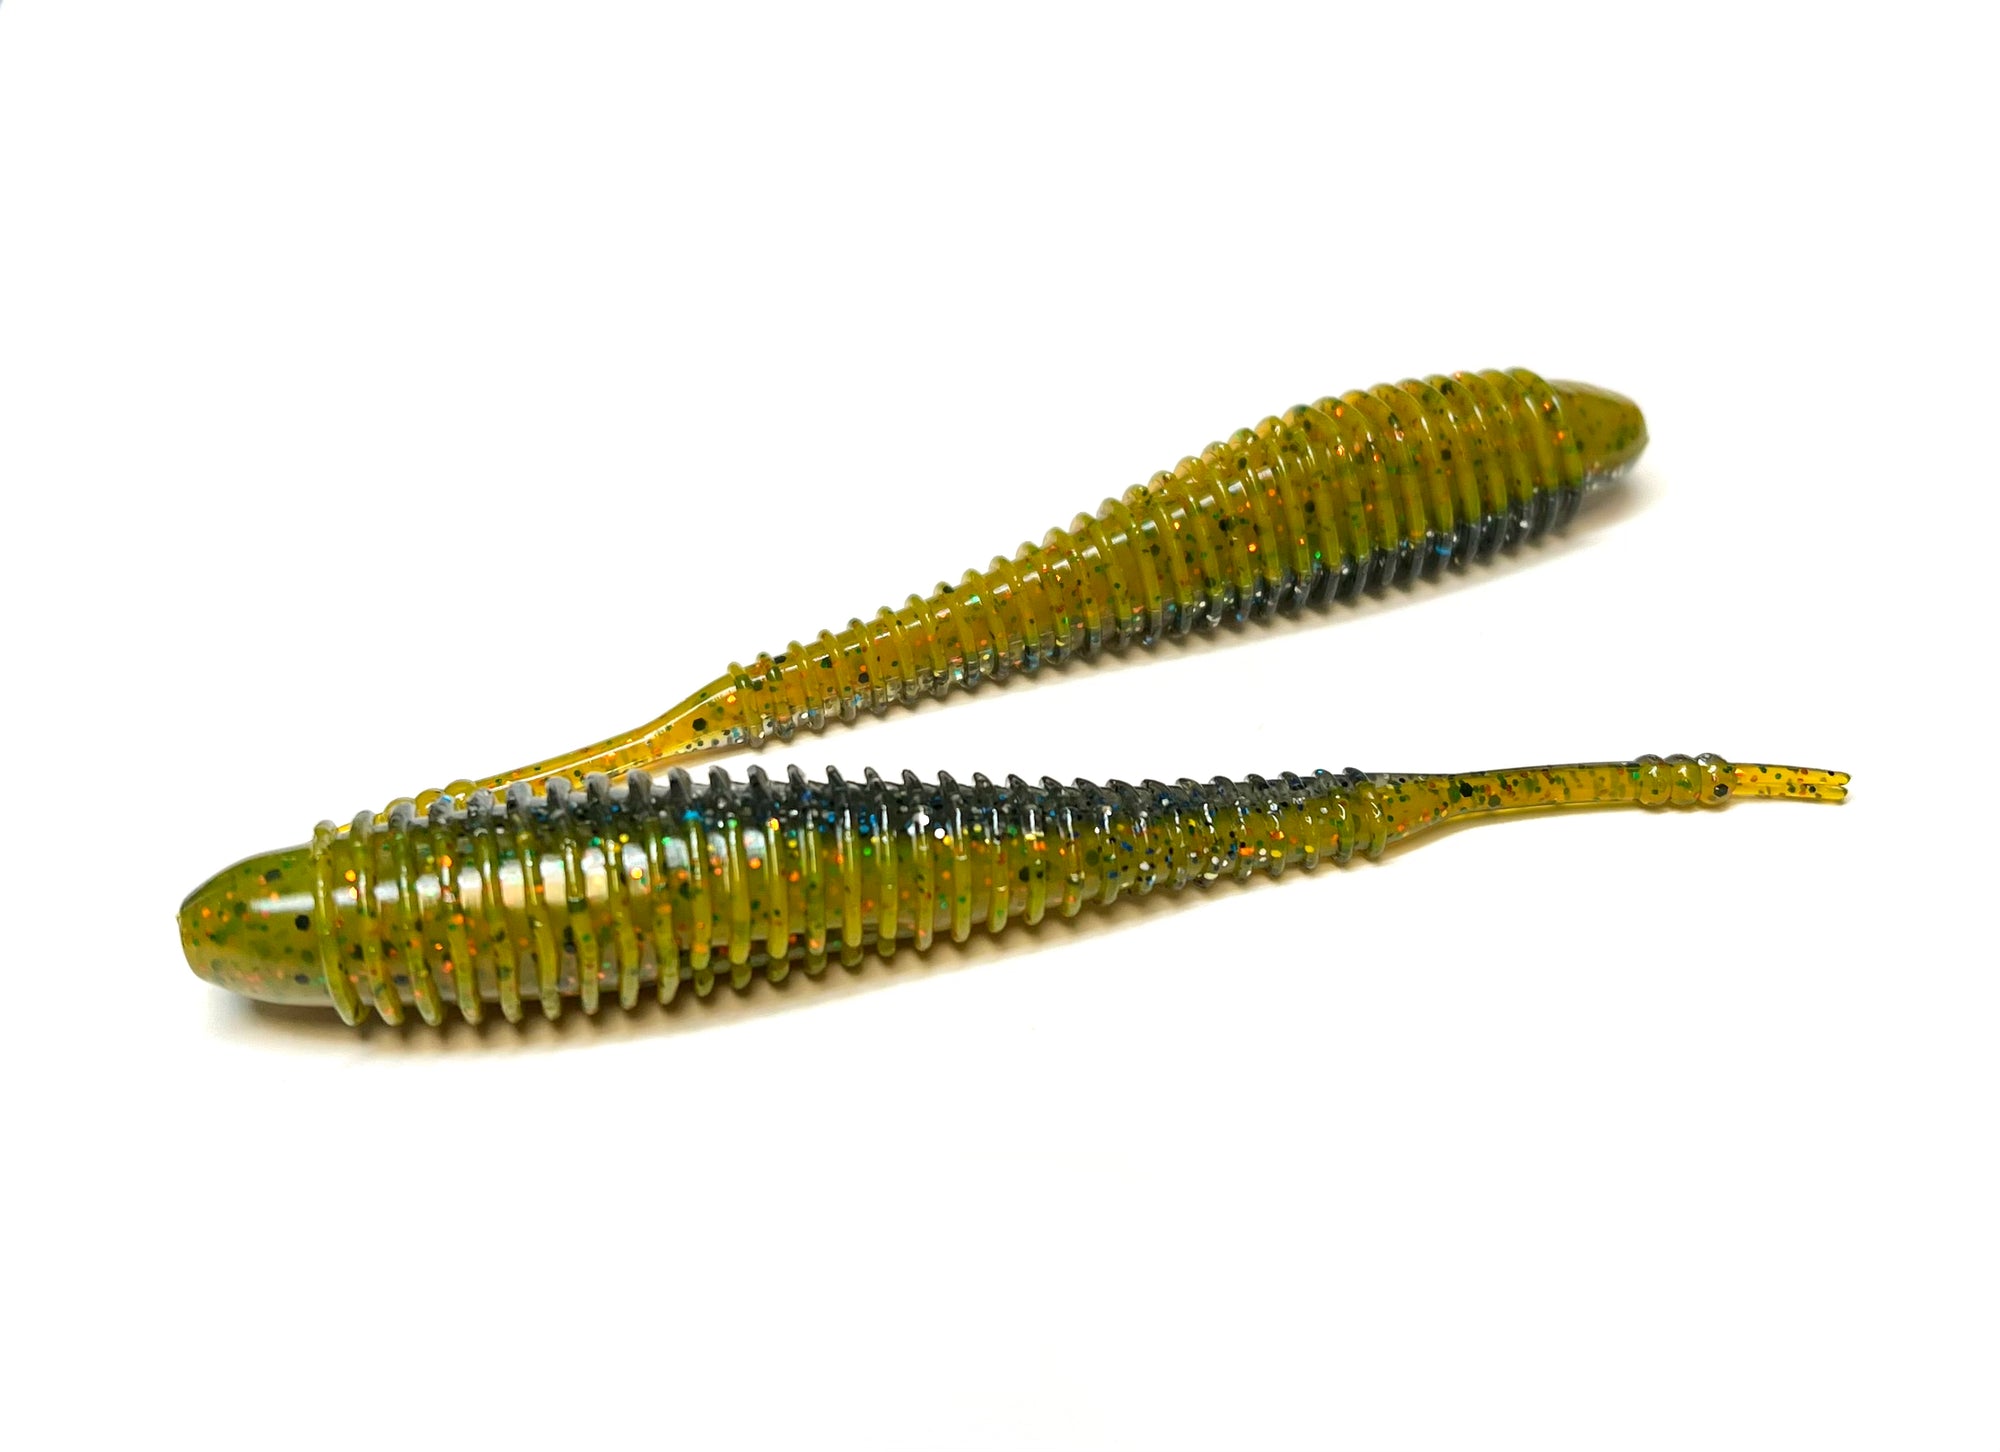 The Assassin | Warmouth | 3.8 Fast-Action Swimbait